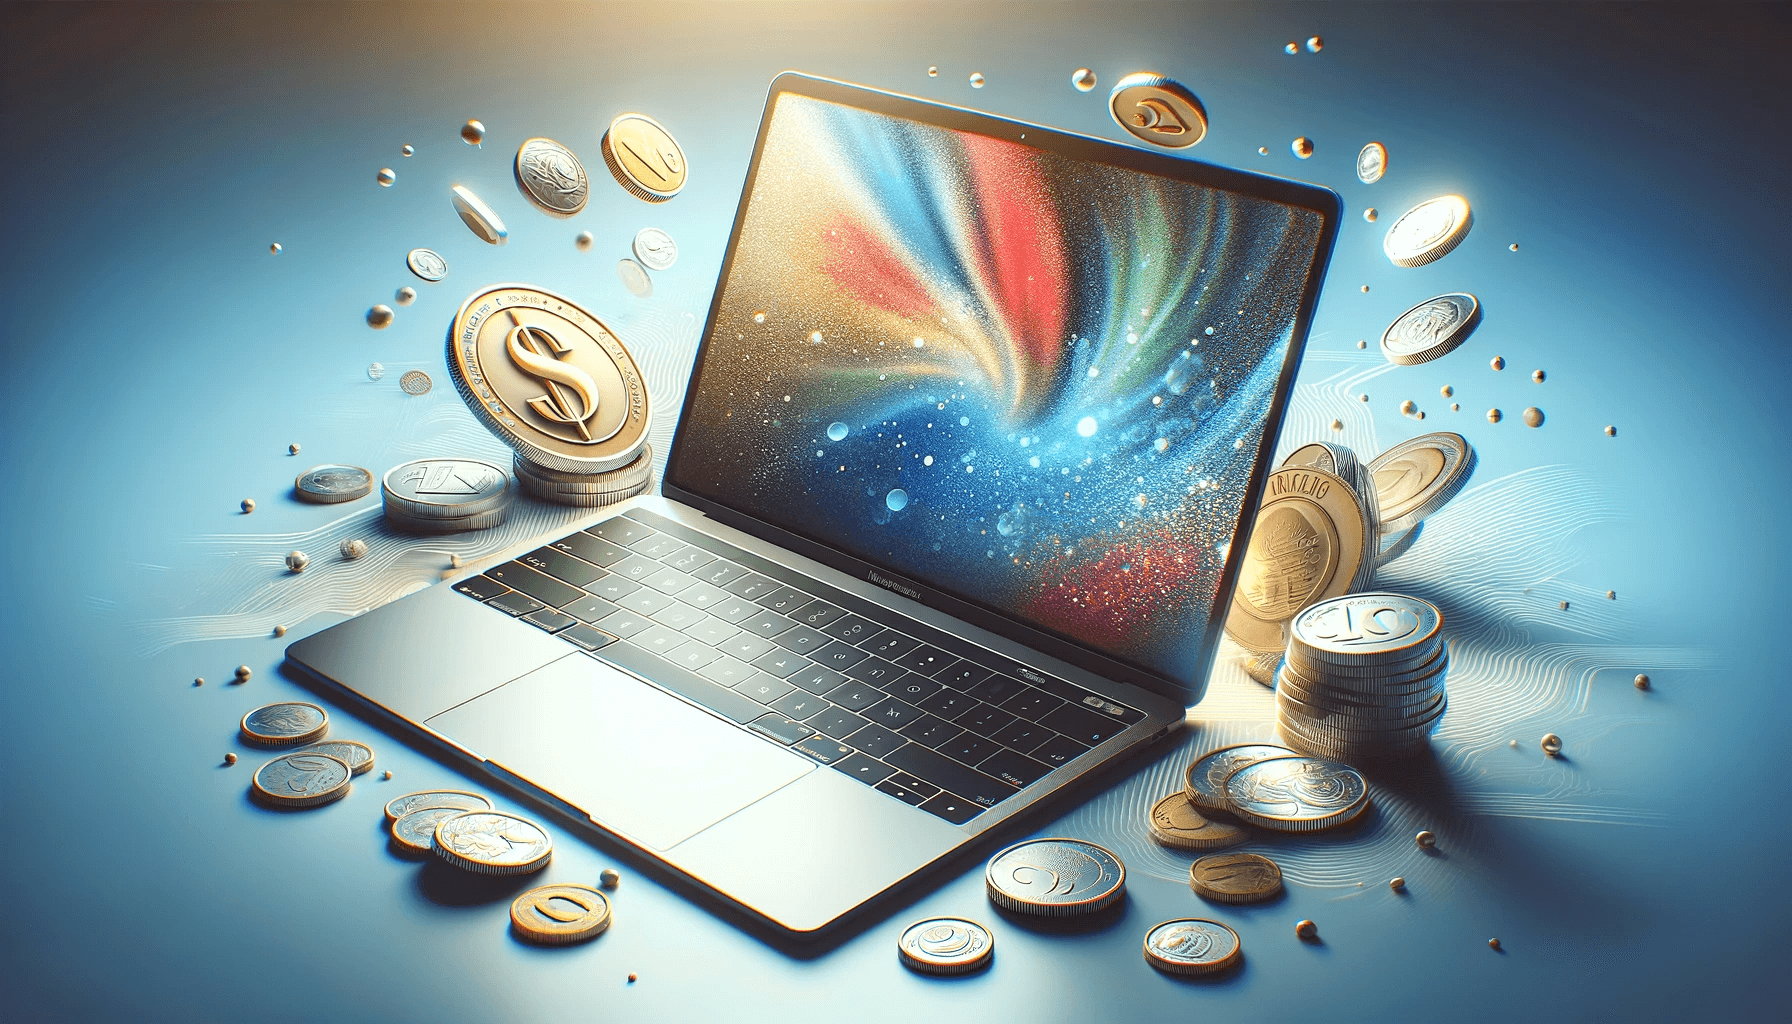 DALL·E 2023 12 19 15.10.28 A digital illustration of a MacBook with coins in the background. The MacBook is depicted open on a desk showcasing its sleek design and high resolut